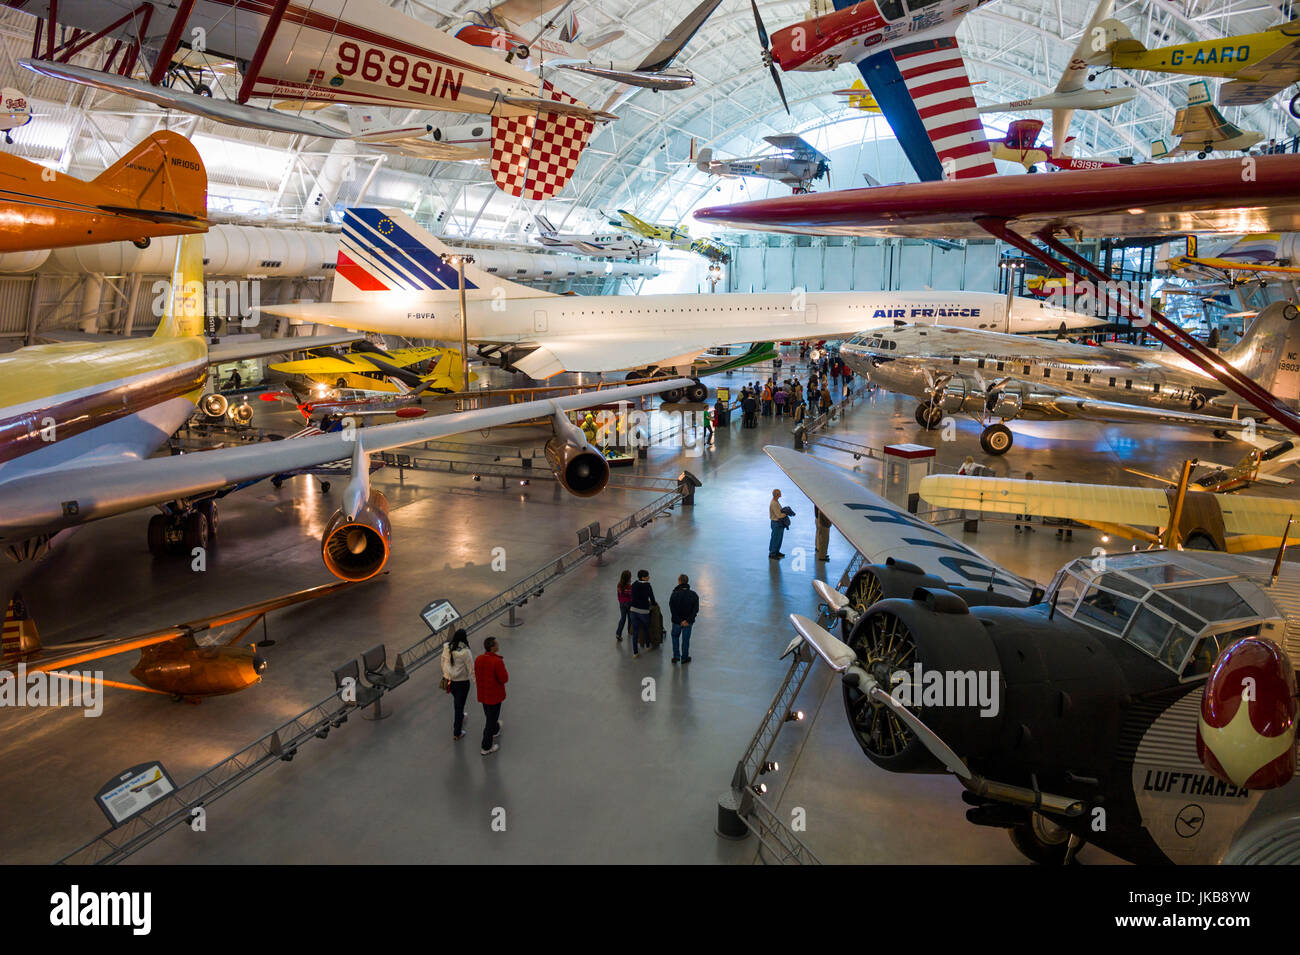 USA, Virginia, Herdon, National Air and Space Museum, Steven F. Udvar-Hazy Center, air museum, commercial aviation exhibits, elevated view Stock Photo